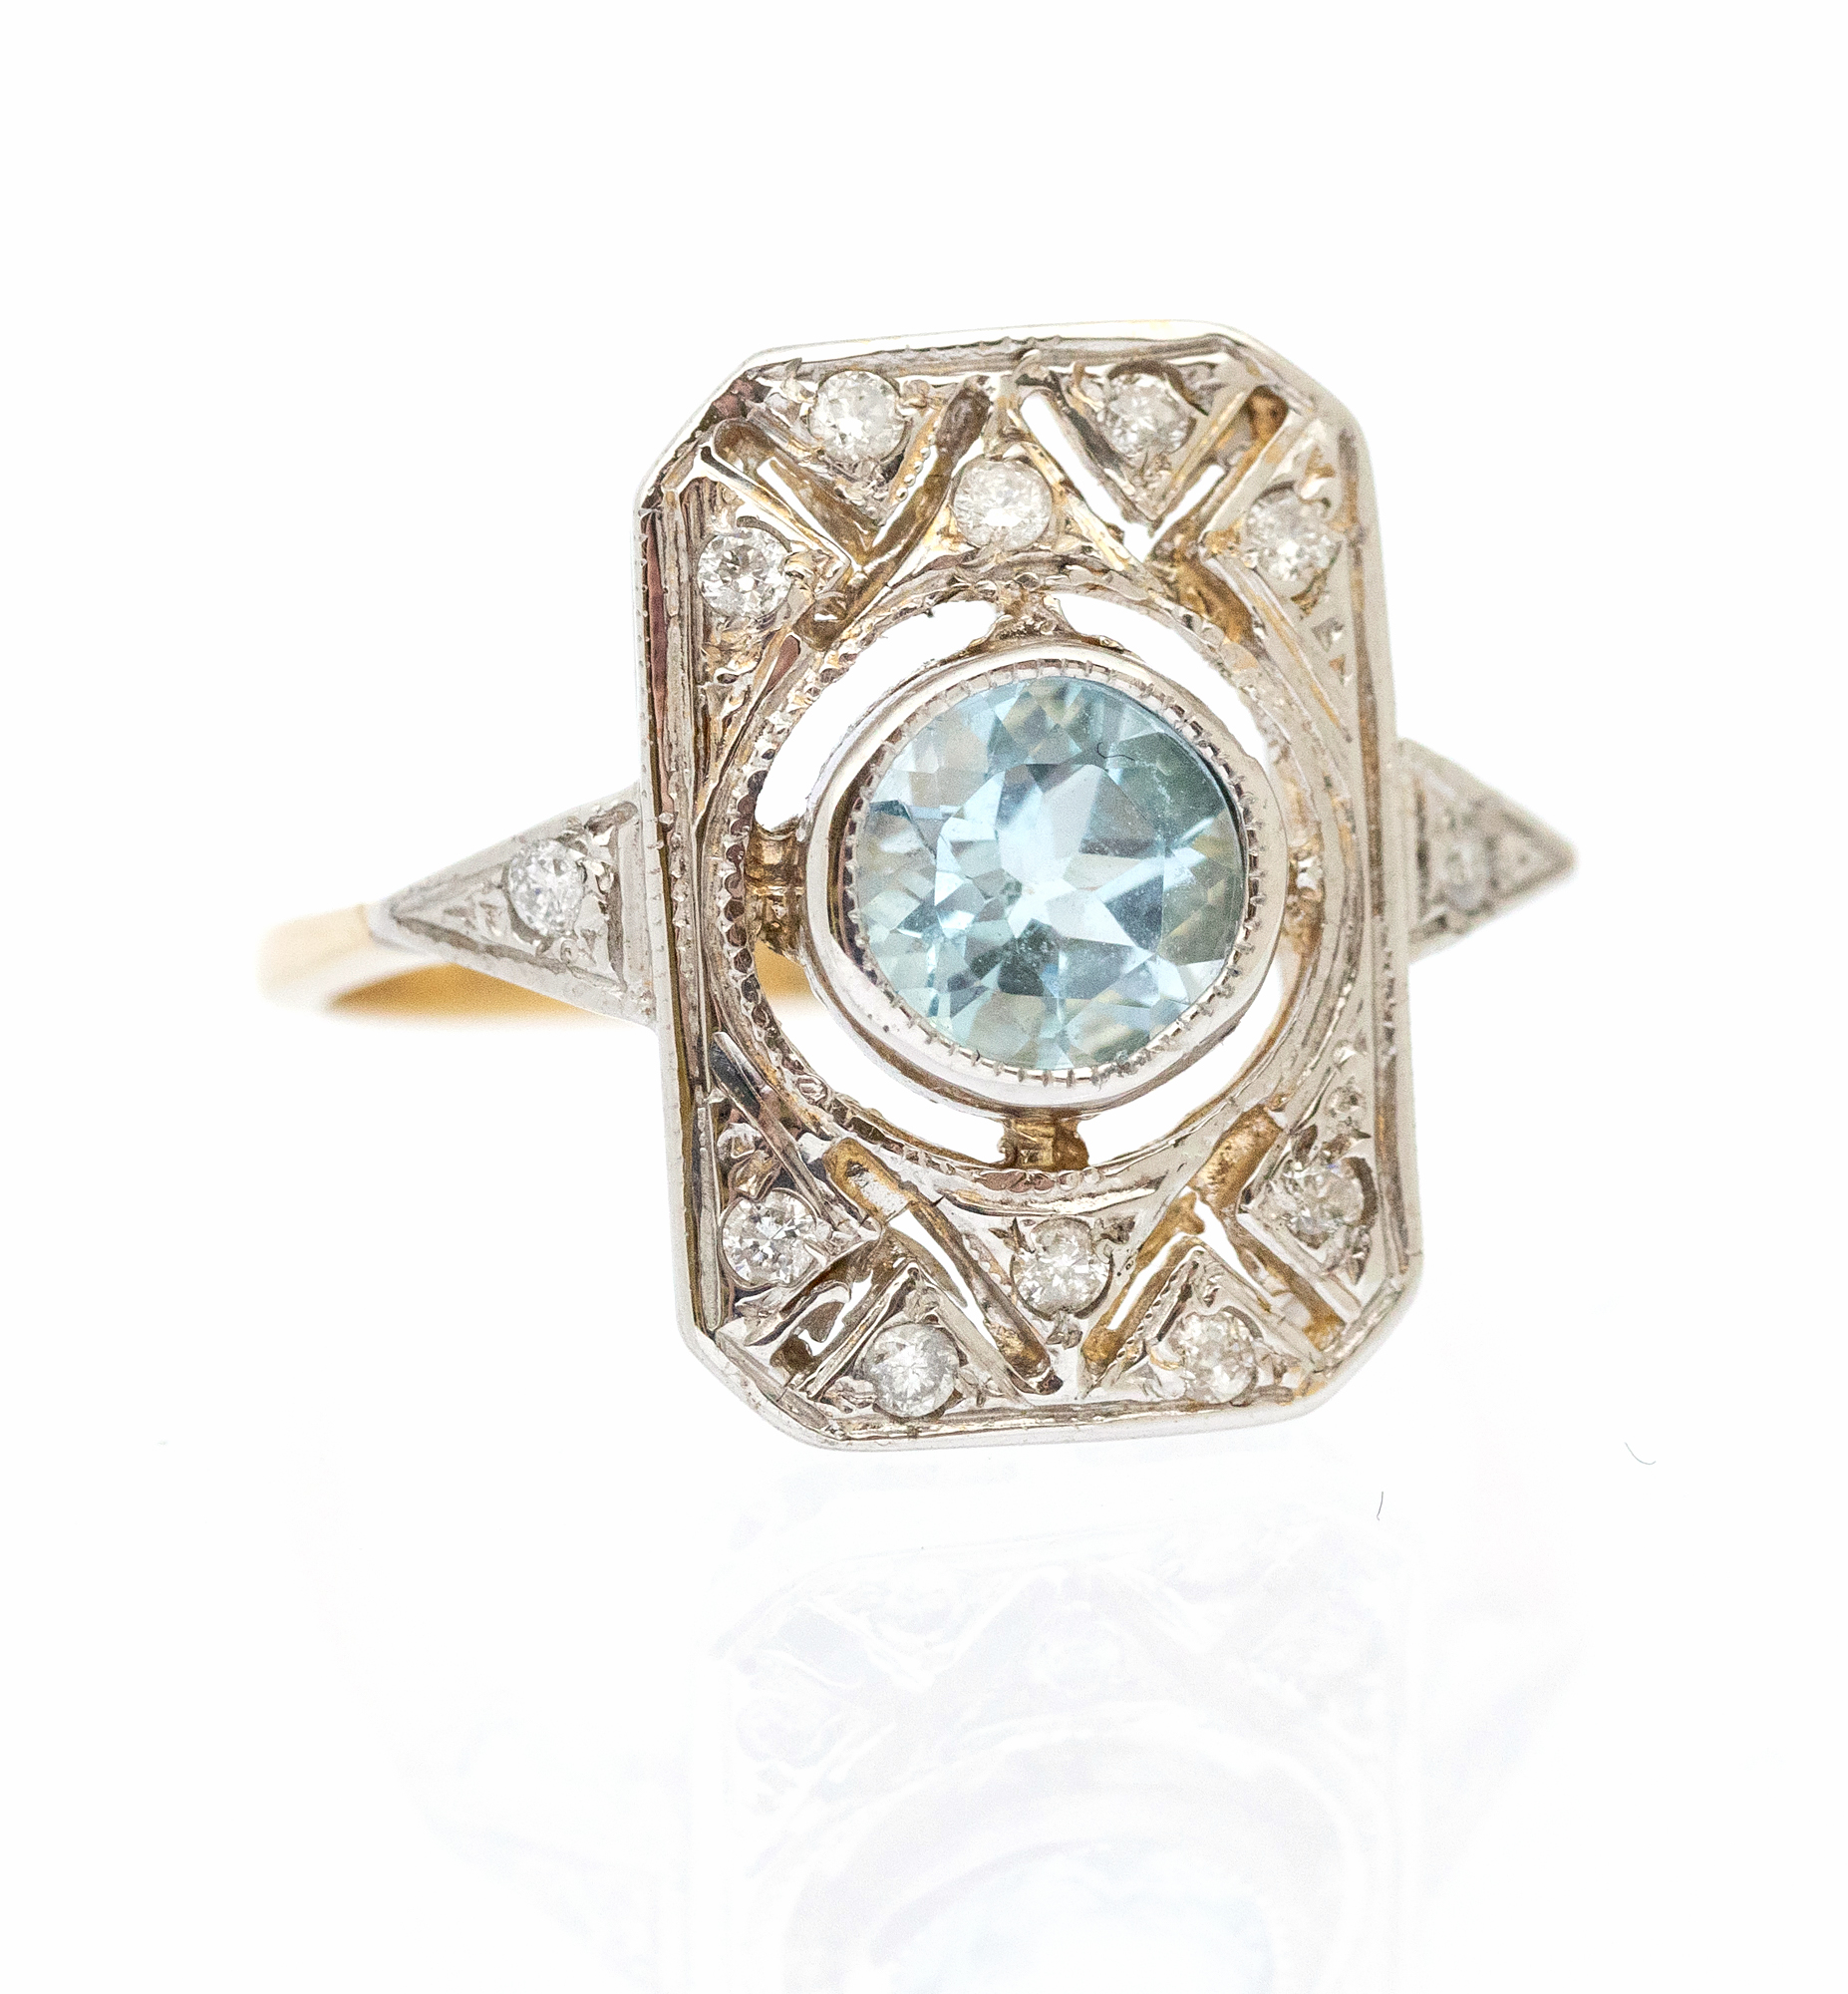 An Art Deco style blue topaz and diamond set 9ct gold panel ring, set with a round mixed blue topaz,